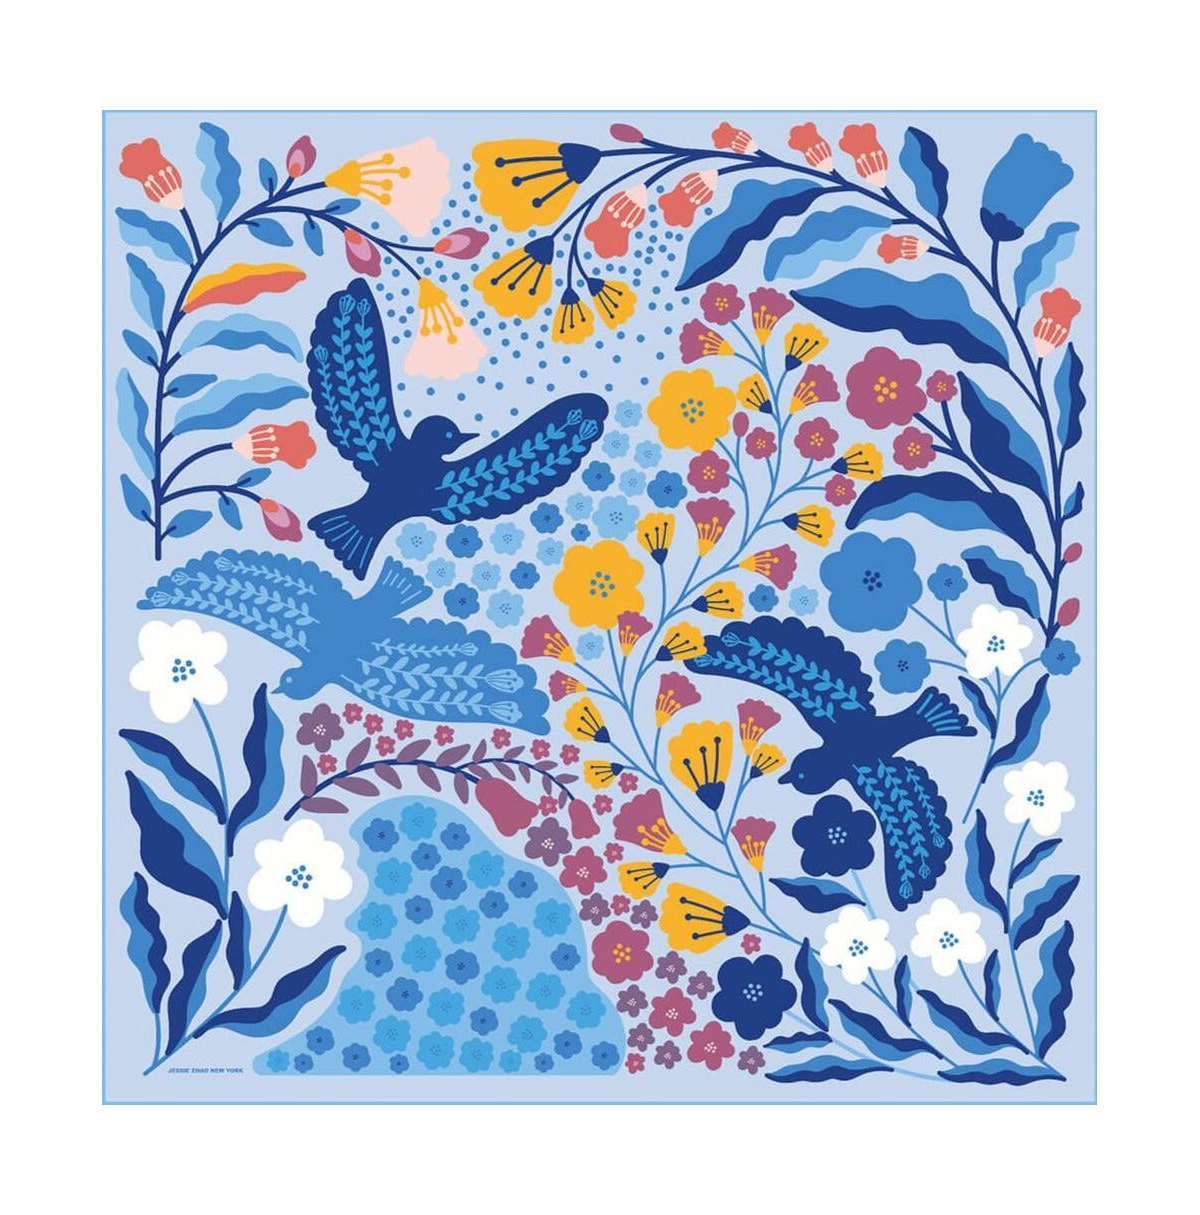 Double Sided Silk Scarf of Blue Birds - Blue and orange